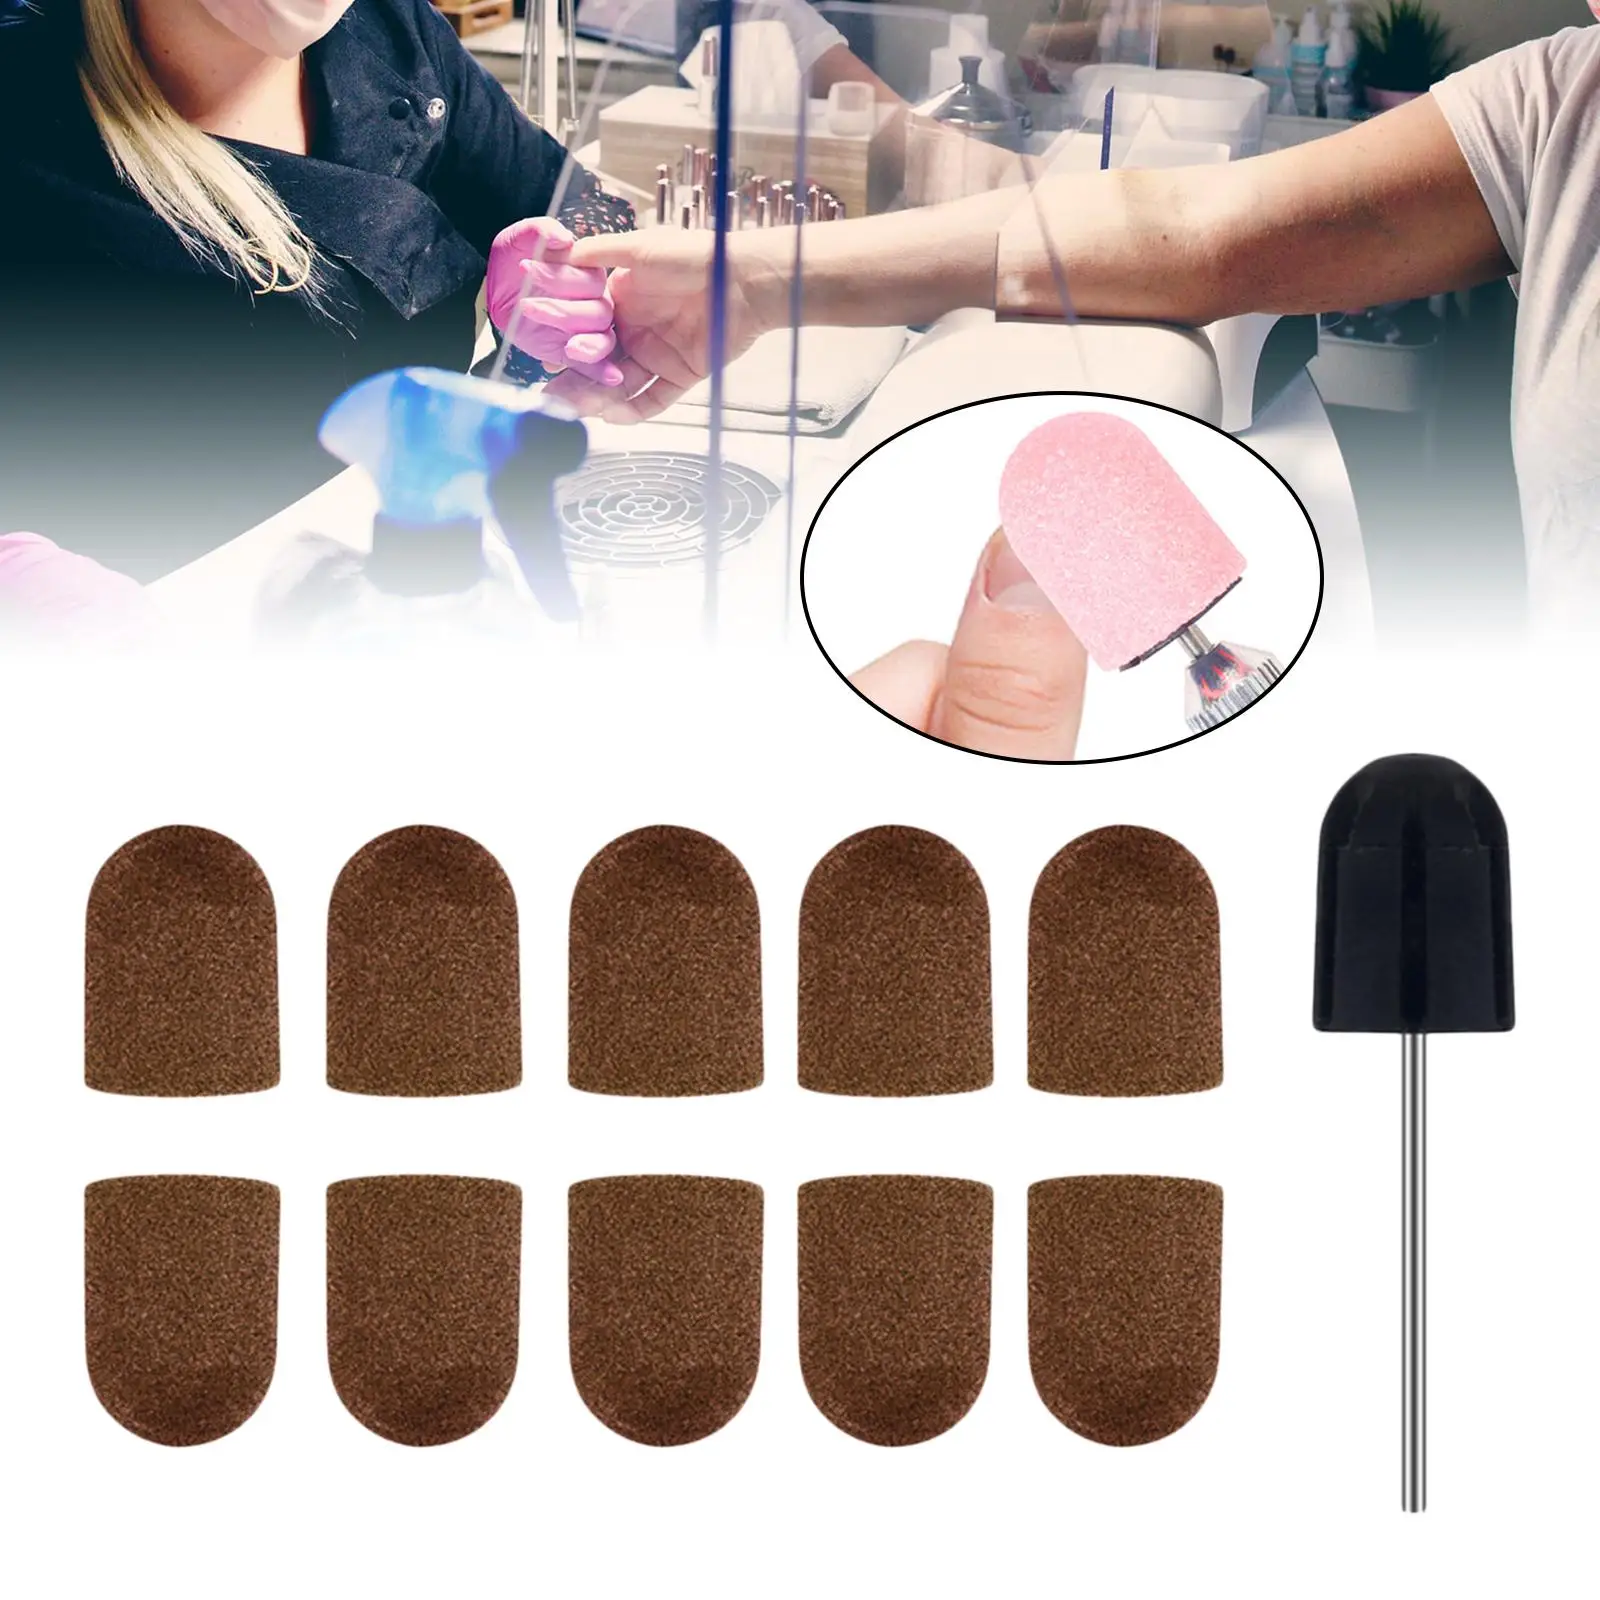 Nail Sanding Caps Bands Manicure Pedicure Acrylic Nails Electric Drill Tools Professional Sanding Grinding Head for Remover Kit